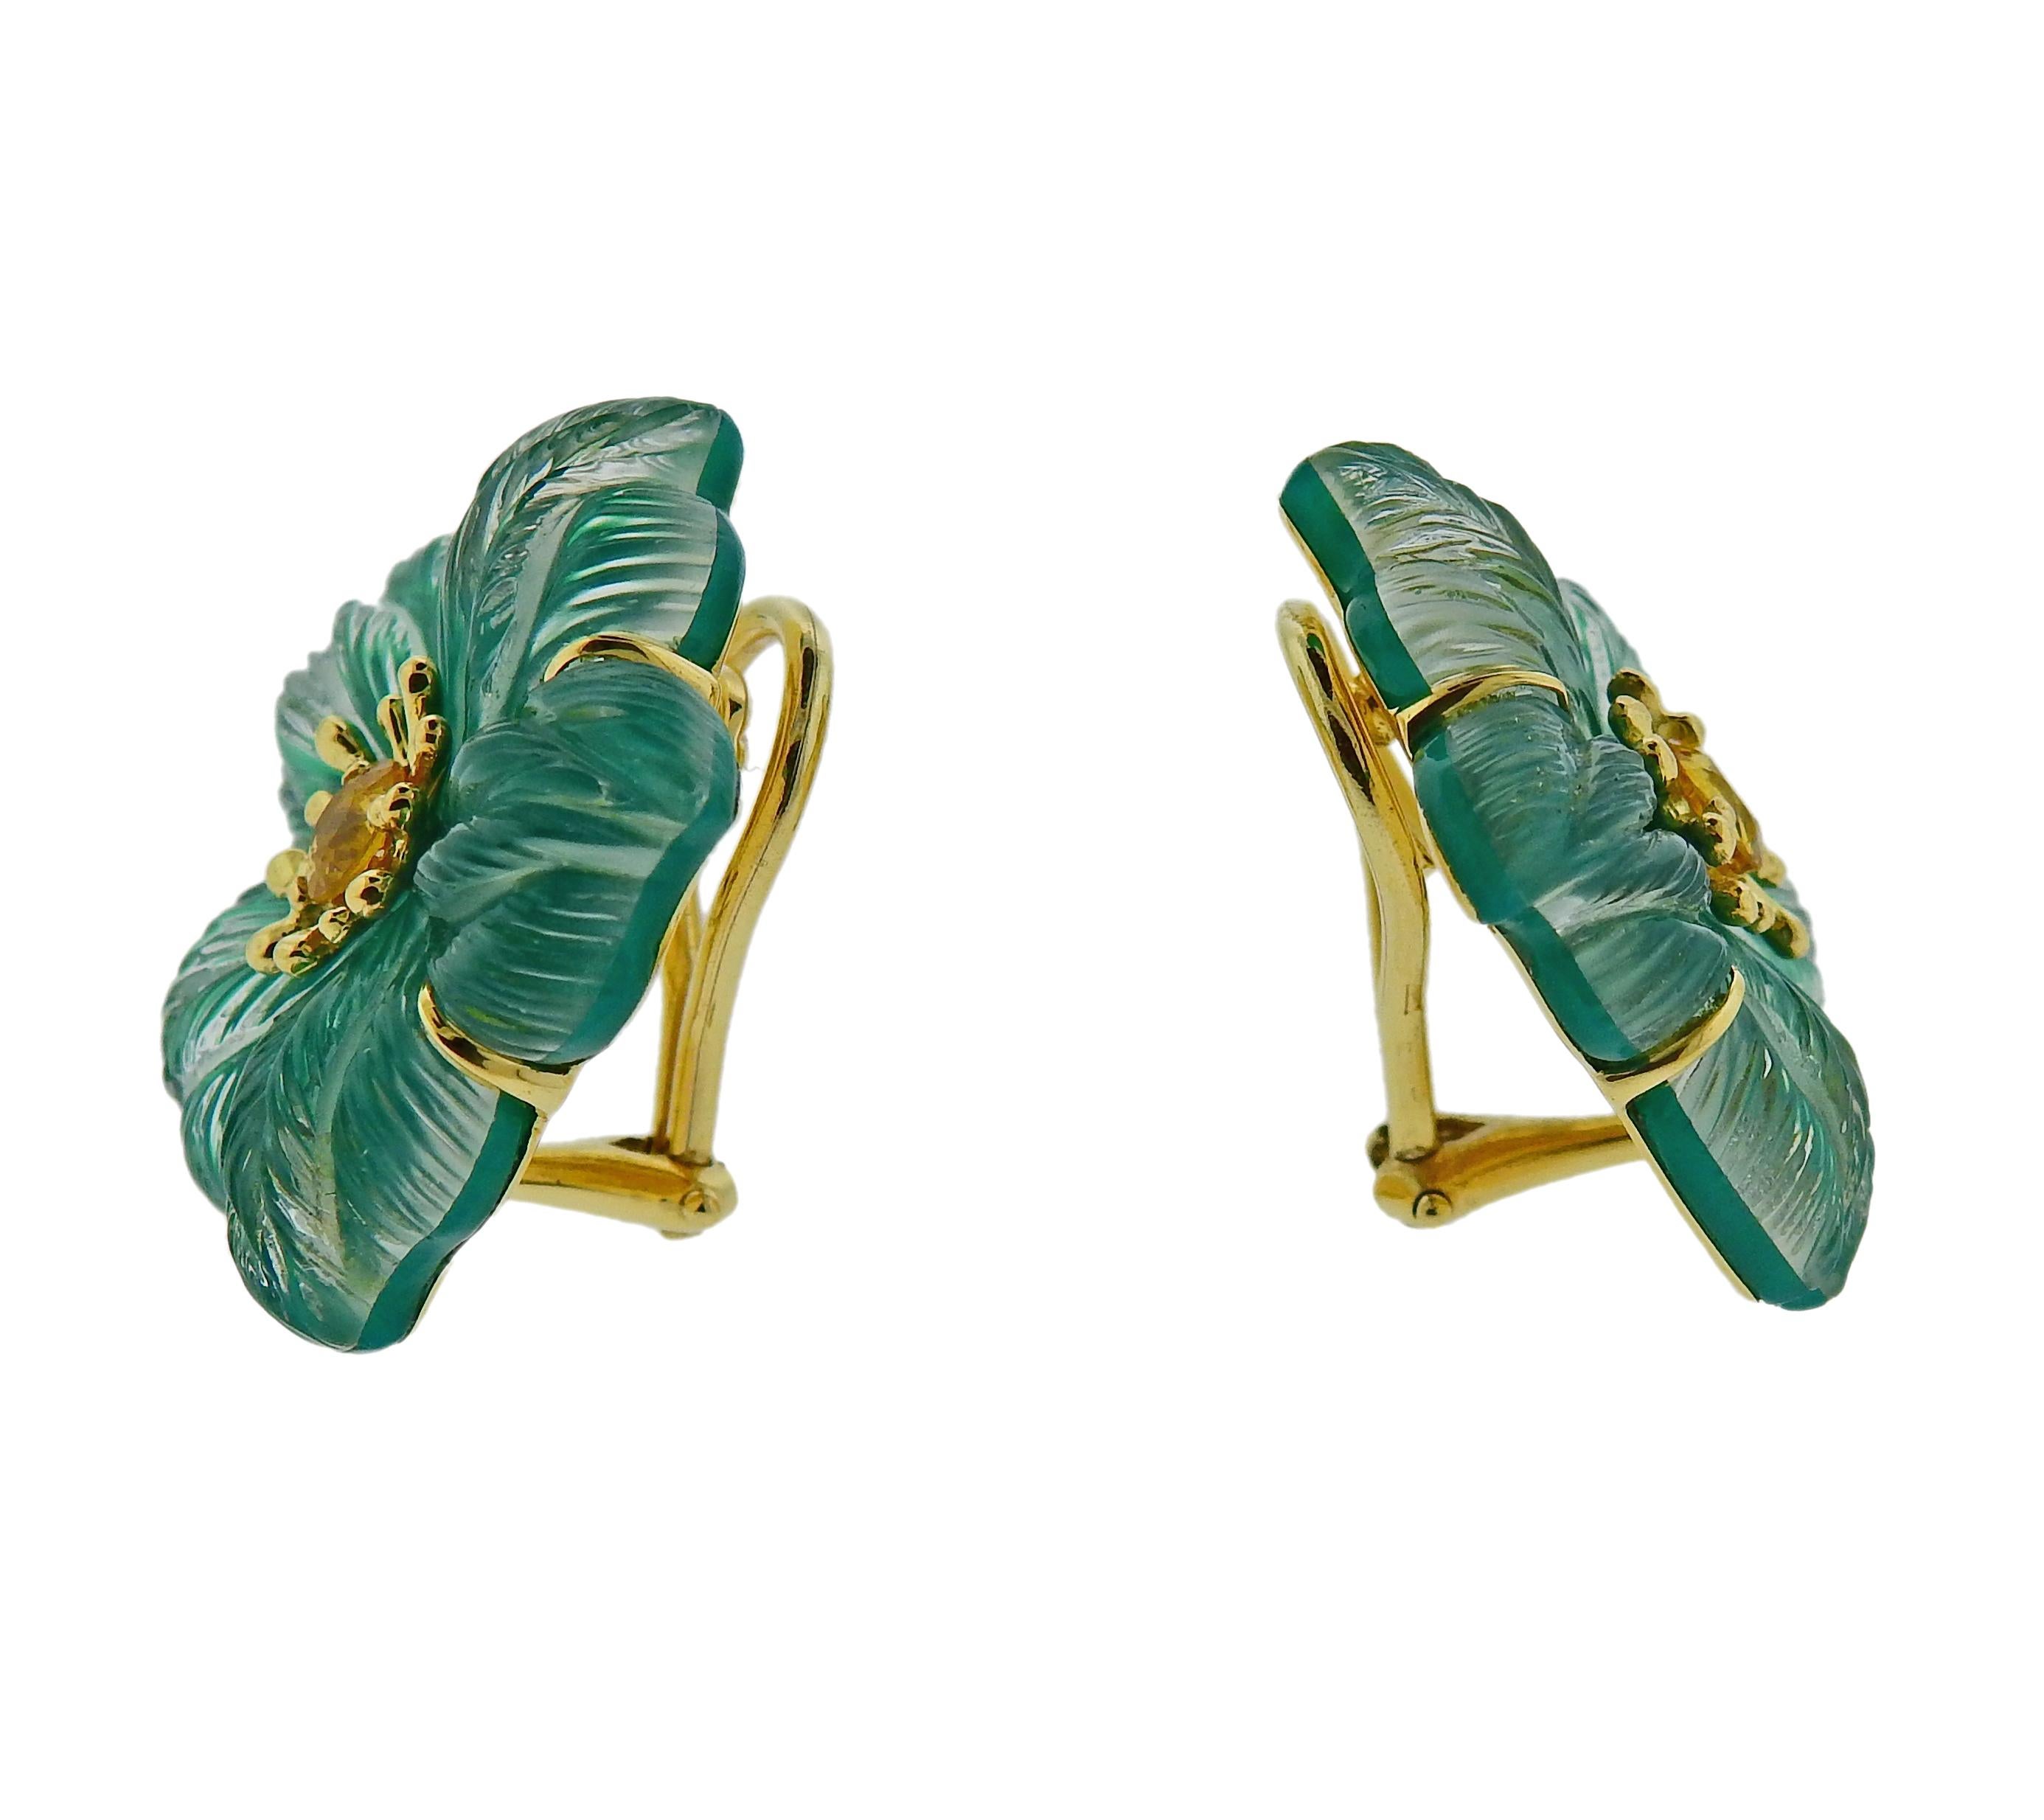 Pair of 18k gold Clematis flower earrings, designed by Seaman Schepps, set with citrine in the center, carved crystal petals, backed with chrysoprase. Retail $6070. Earrings are 25mm x 25mm, weigh 15.3 grams. Marked: Seaman Schepps, Shell mark, 750,